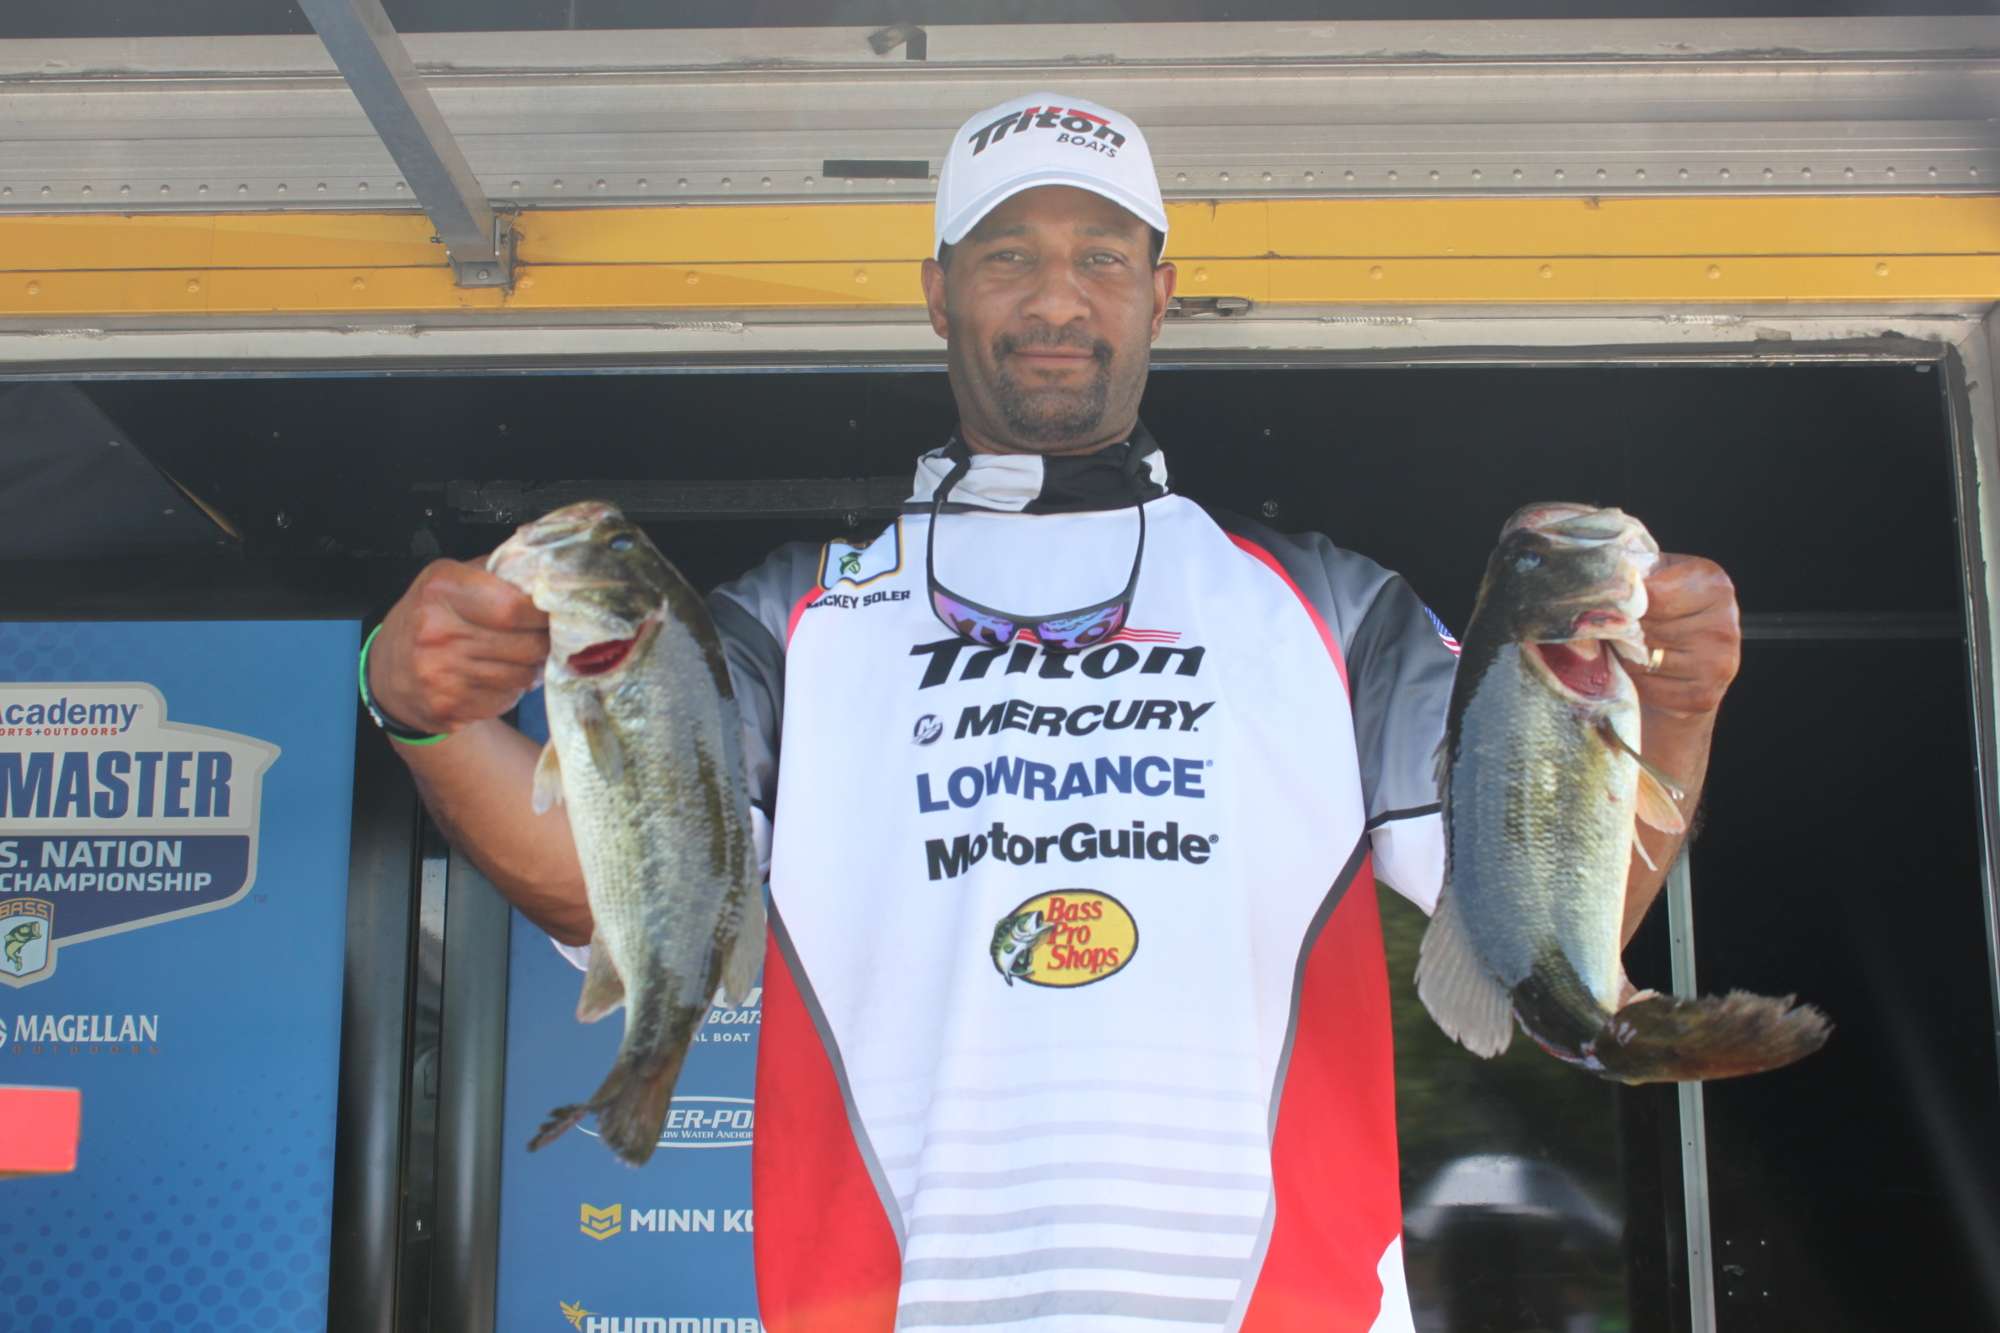 Mickey Soler of Connecticut will fish Friday. Heâs 43rd among boaters with 12-7 over two days, but heâs in third place among boaters on his team.